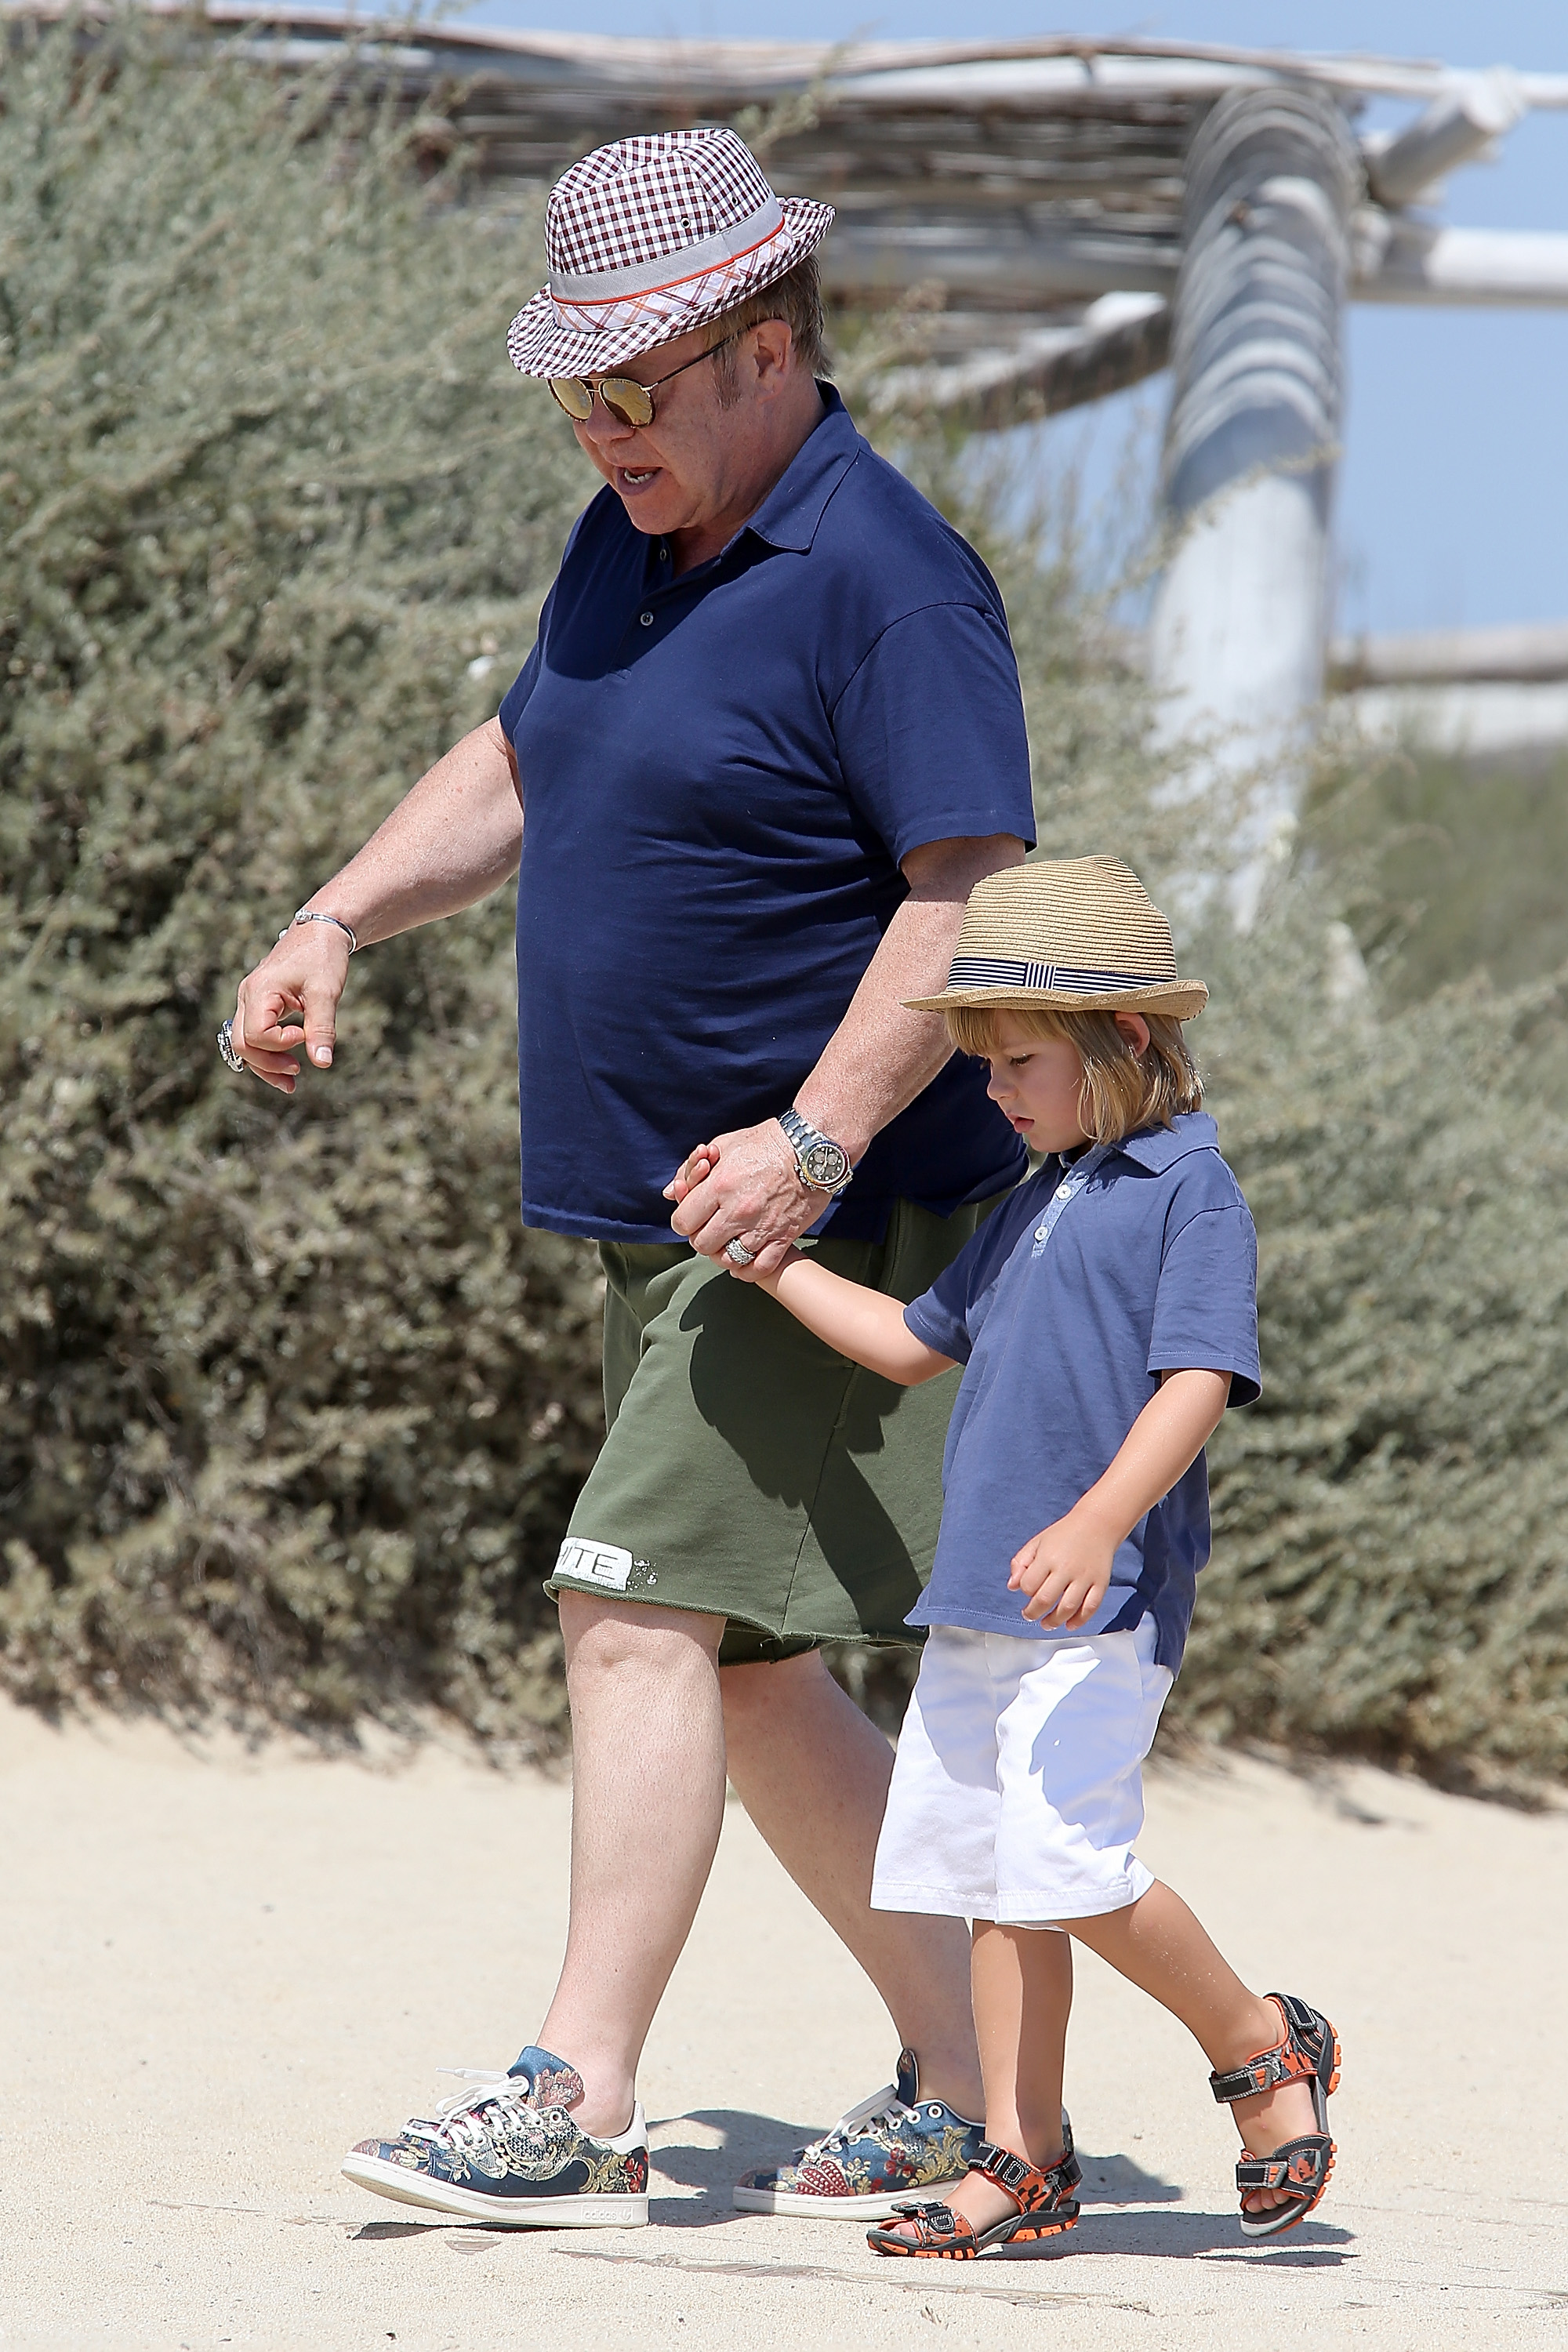 Elton John and their son Zachary in France in 2015 | Source: Getty Images